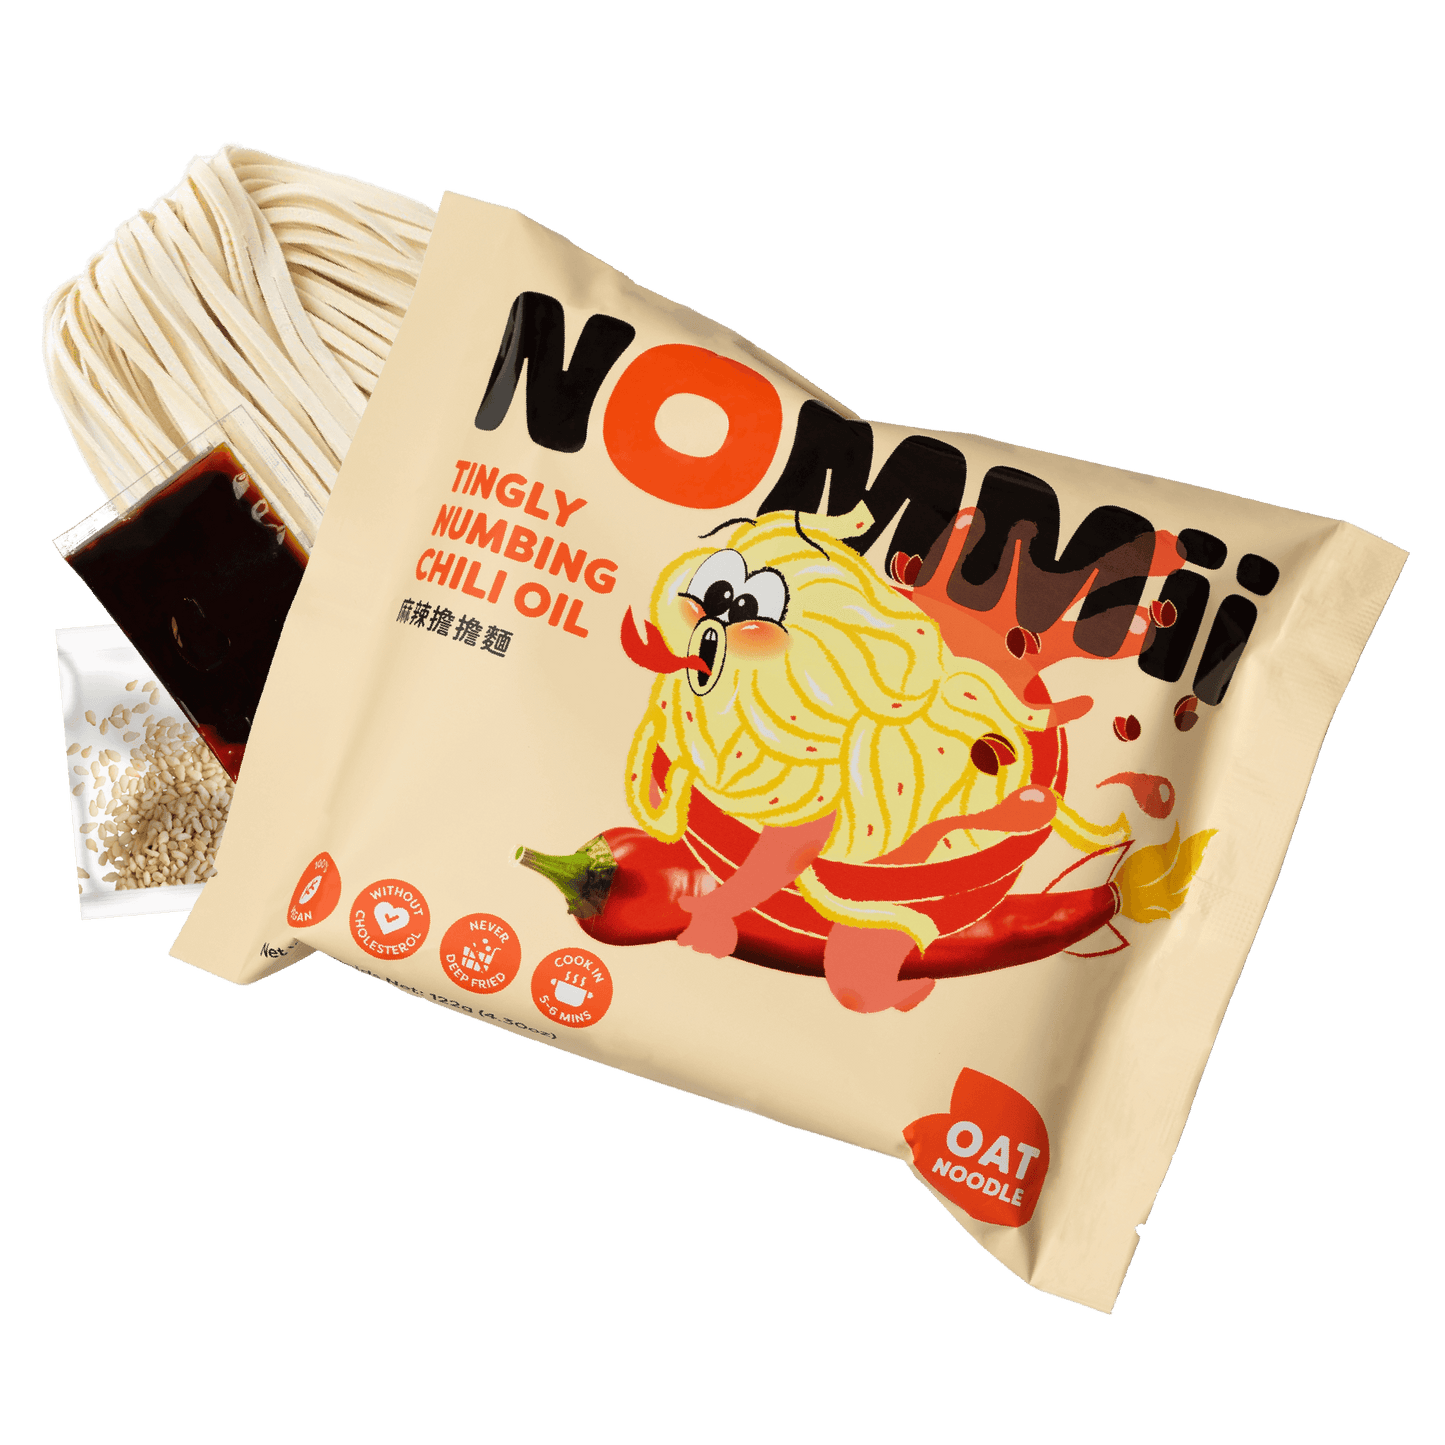 Tingly Numbing Chili Oil Oat Noodles (8-Pack) - NOMMii